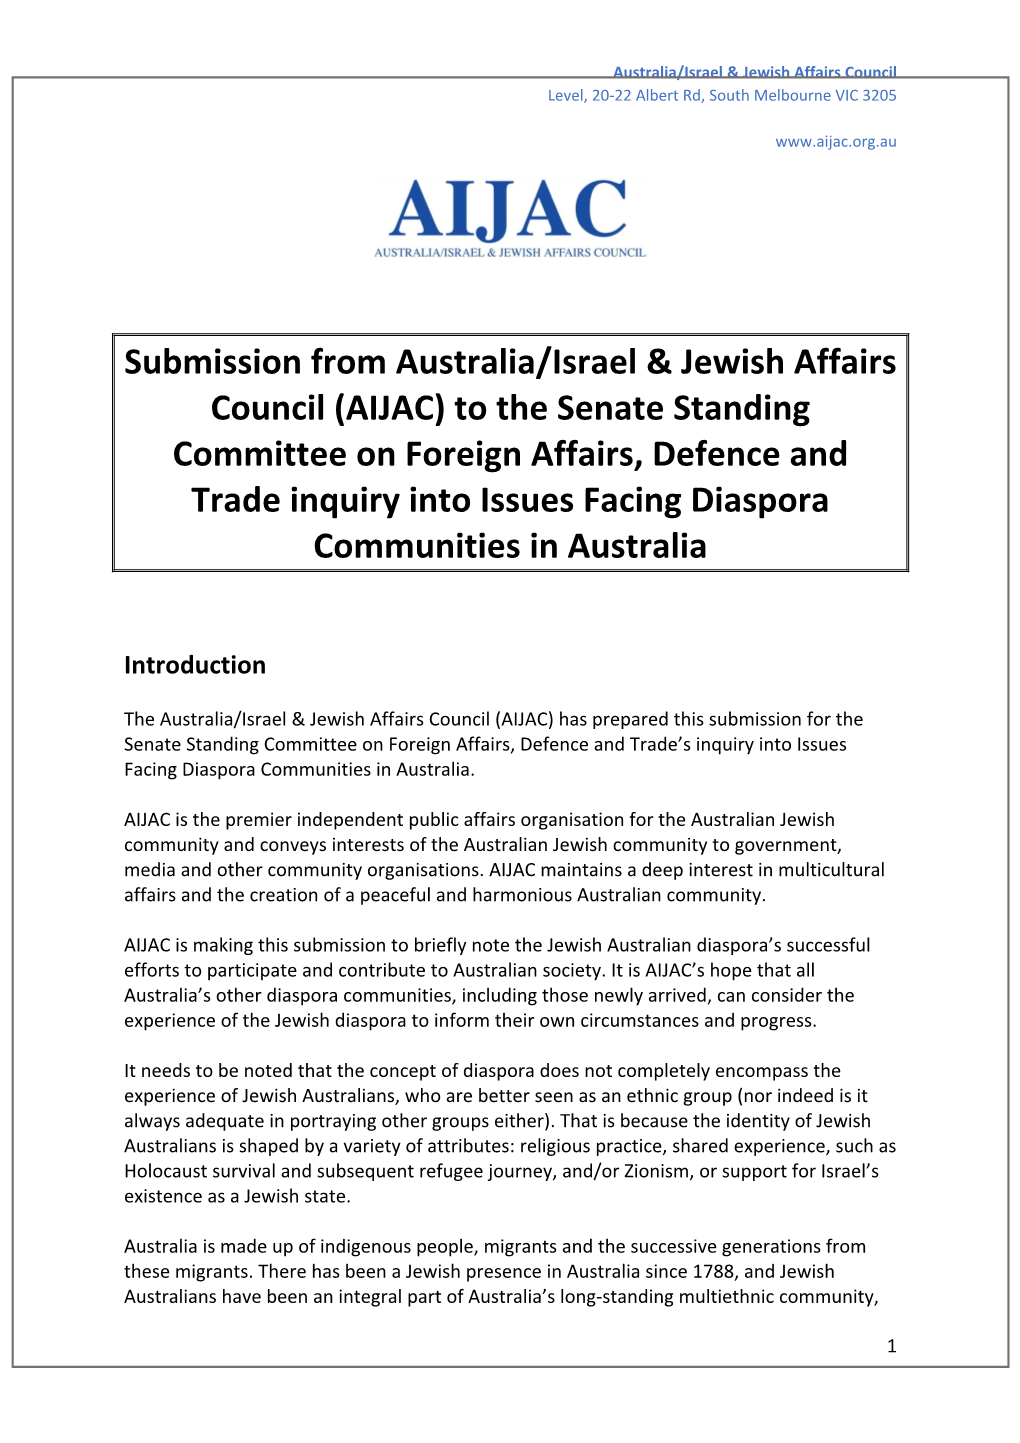 Submission from Australia/Israel & Jewish Affairs Council (AIJAC)